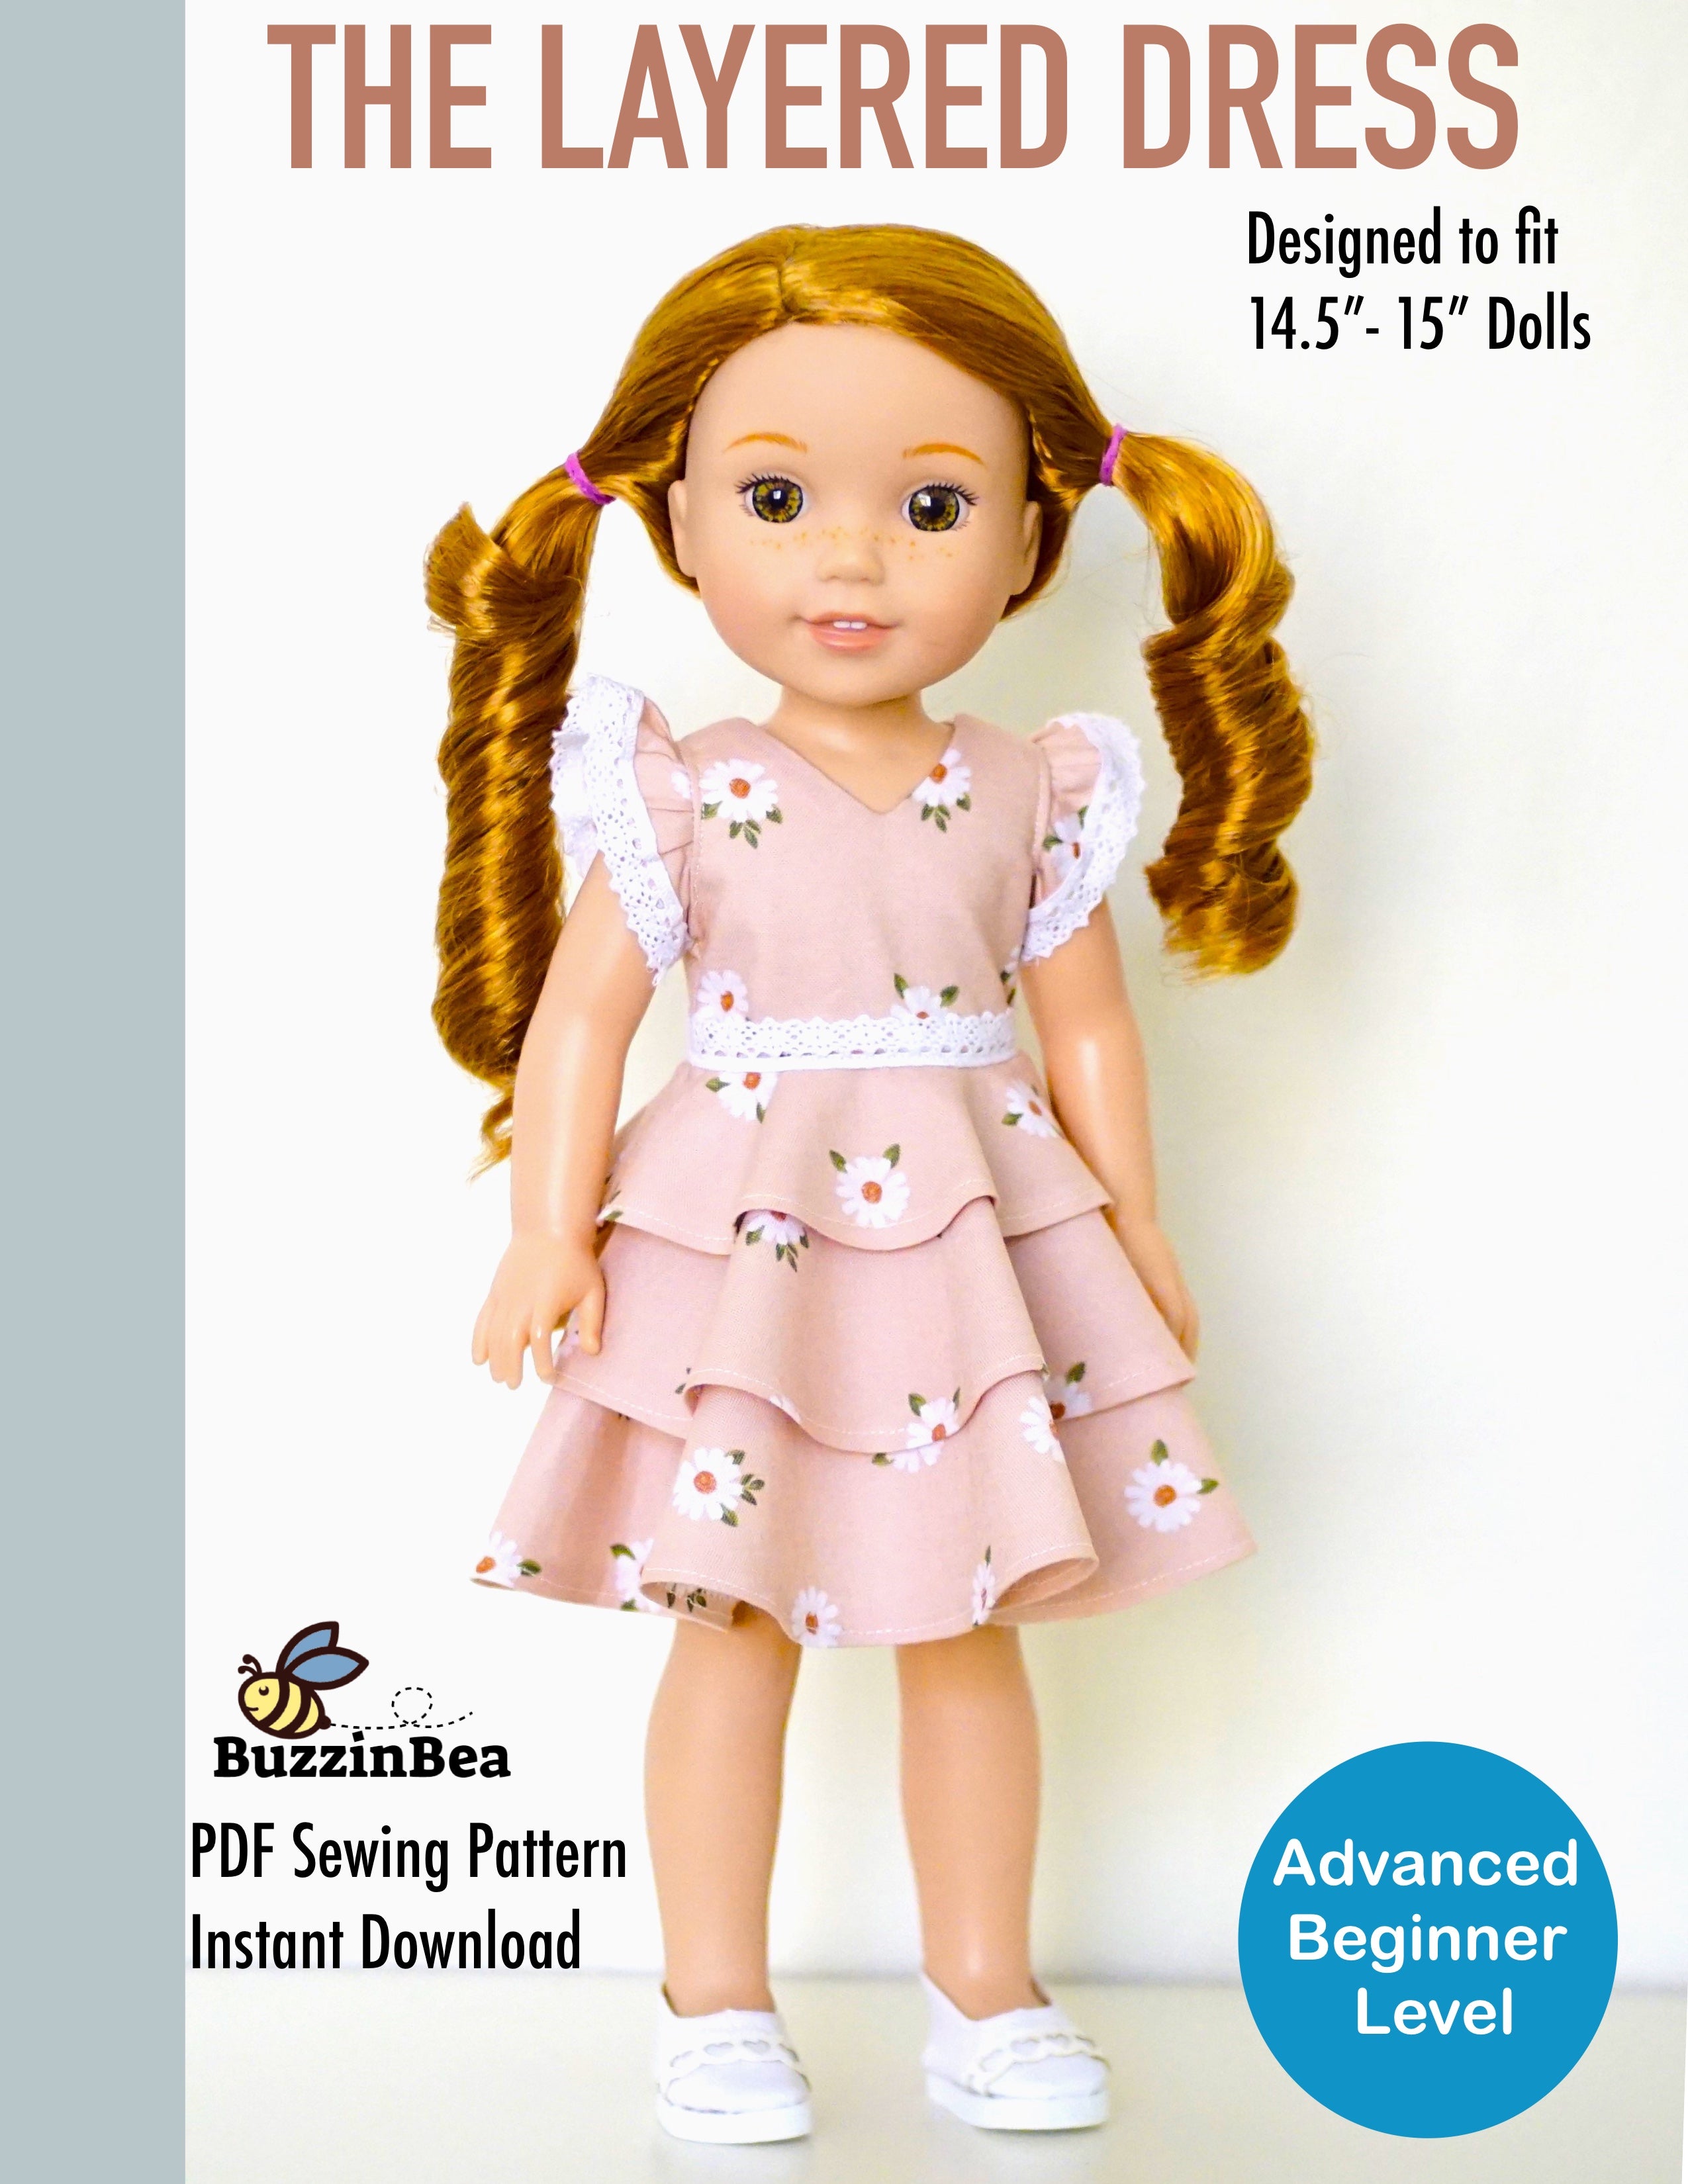 Best Fabrics for Sewing Doll Clothes – BuzzinBea Doll Sewing Patterns